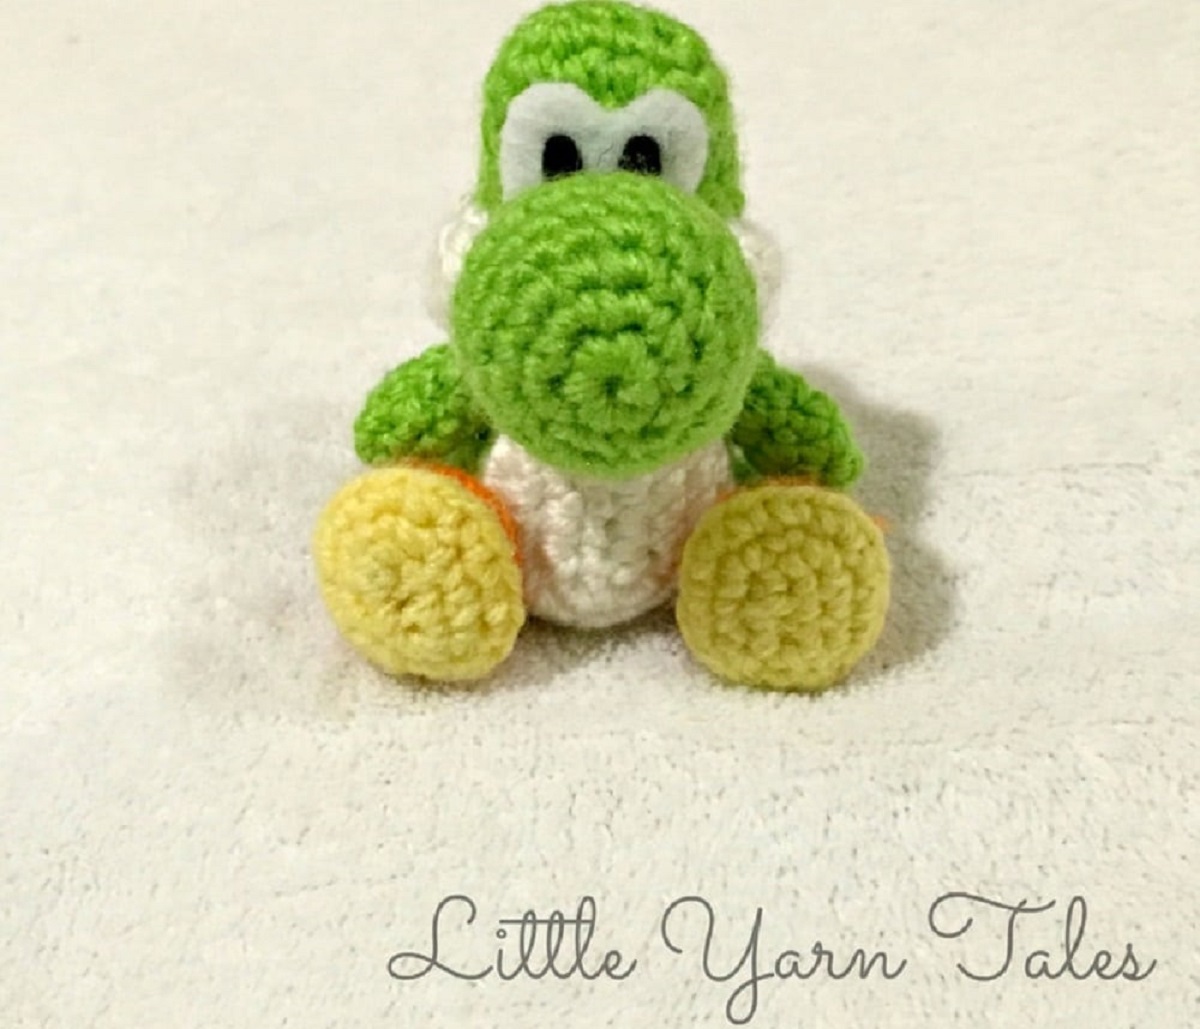 Small crochet stuffed green and white Yoshi with yellow feet sitting down on a cream carpet.